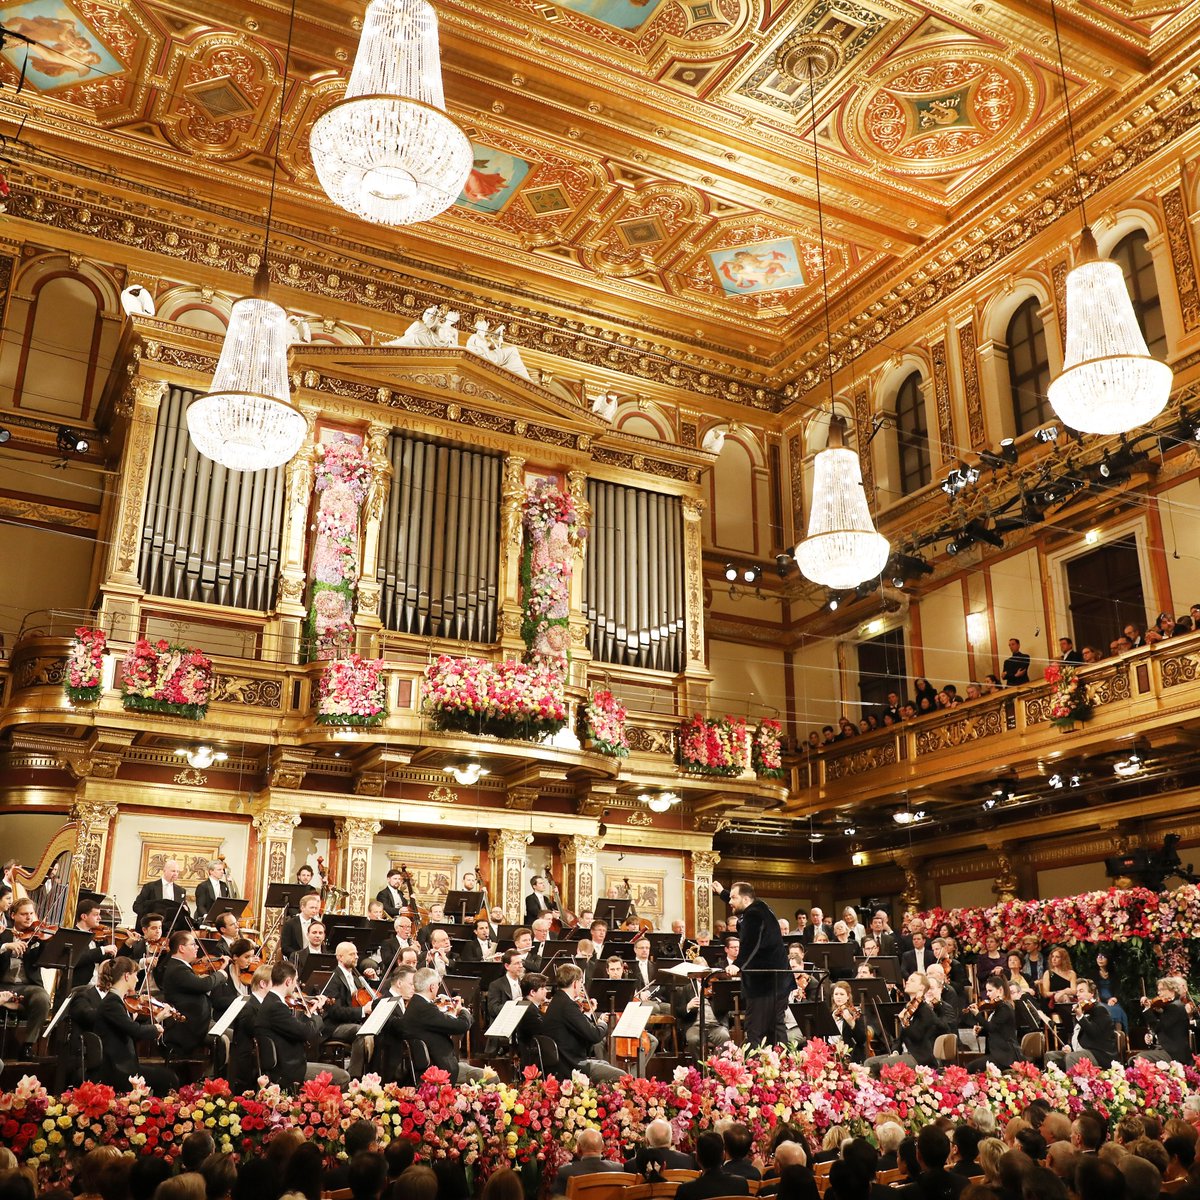 The New Year's concert by the @Vienna_Phil is perhaps the most famous concert in the world and will be broadcast today at 11:15 a.m. from the Golden Hall of the @Musikverein to an audience of millions! 🎺

📺 Where are you tuning in live from today? #ViennaNow